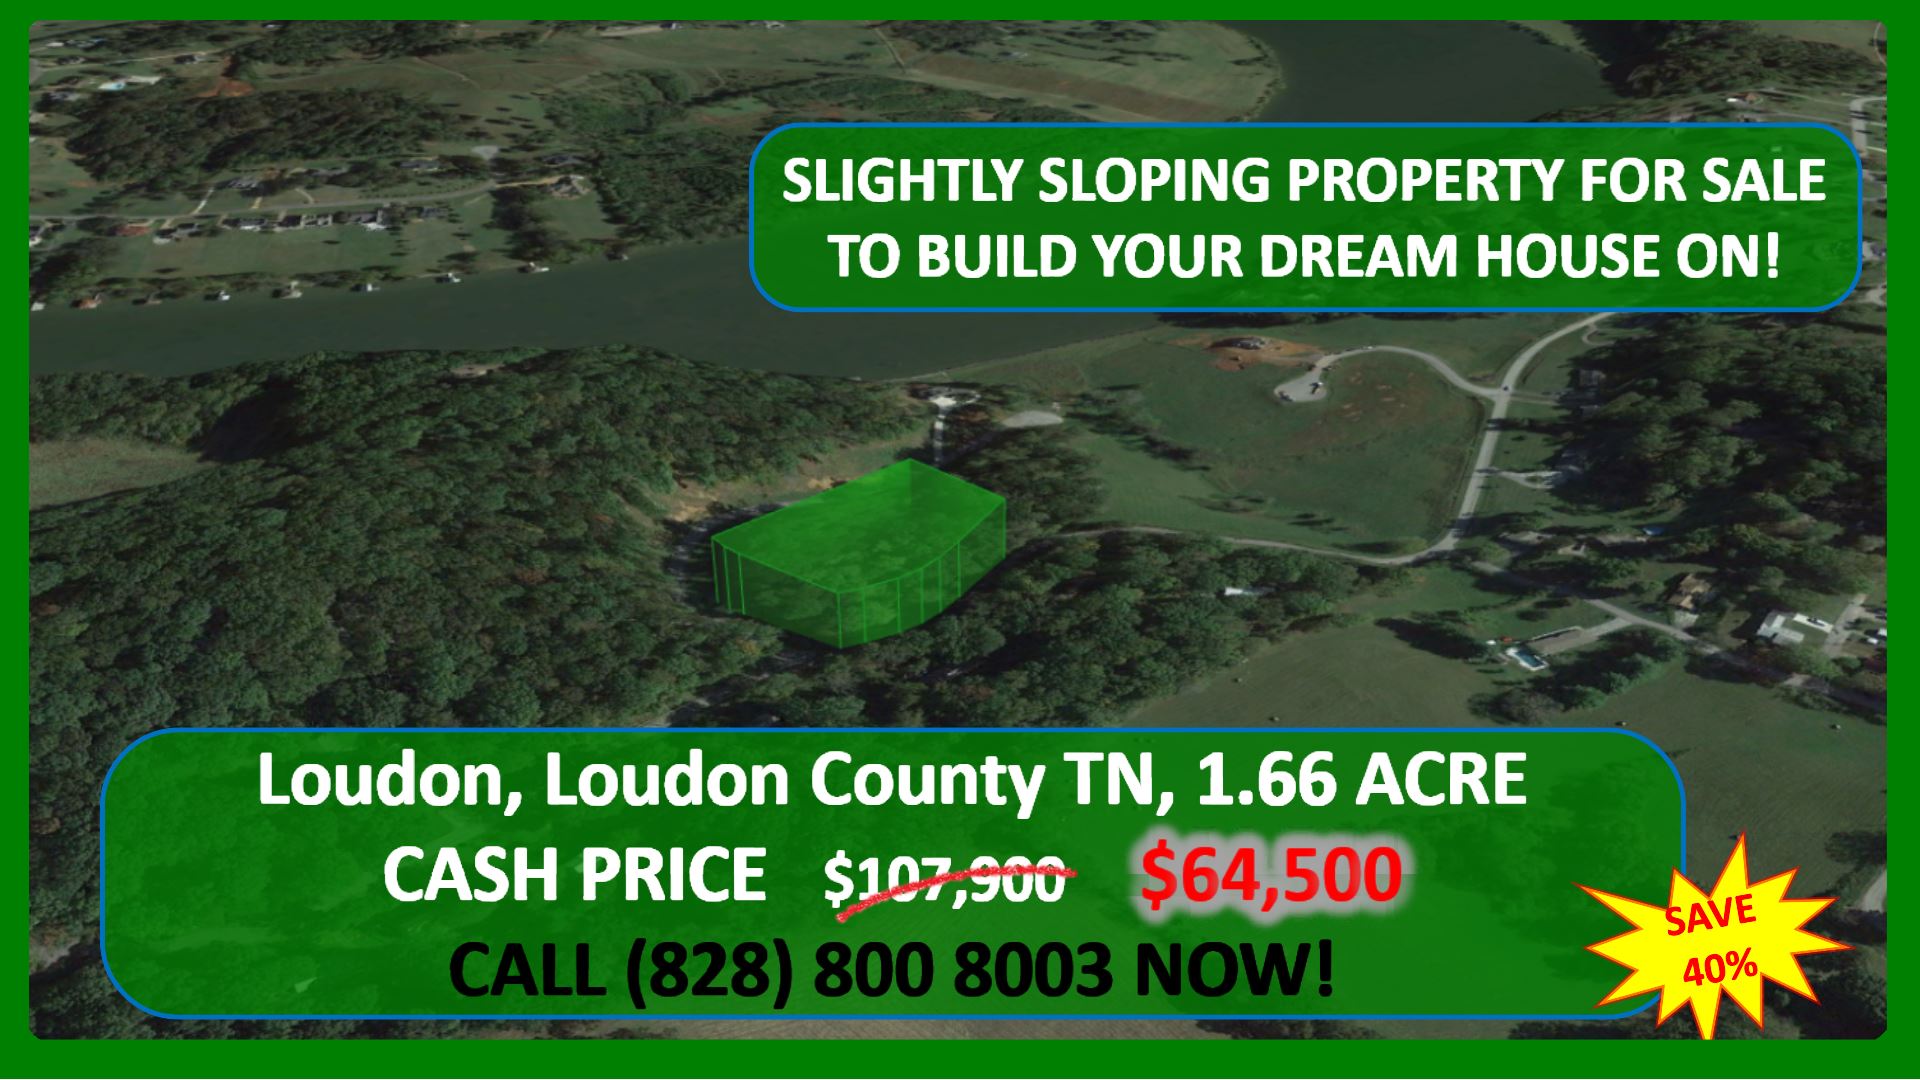 Beautiful, 1.66 acre Lot, close to Lake, ready to build your DREAM HOME on in Loudon County, TN